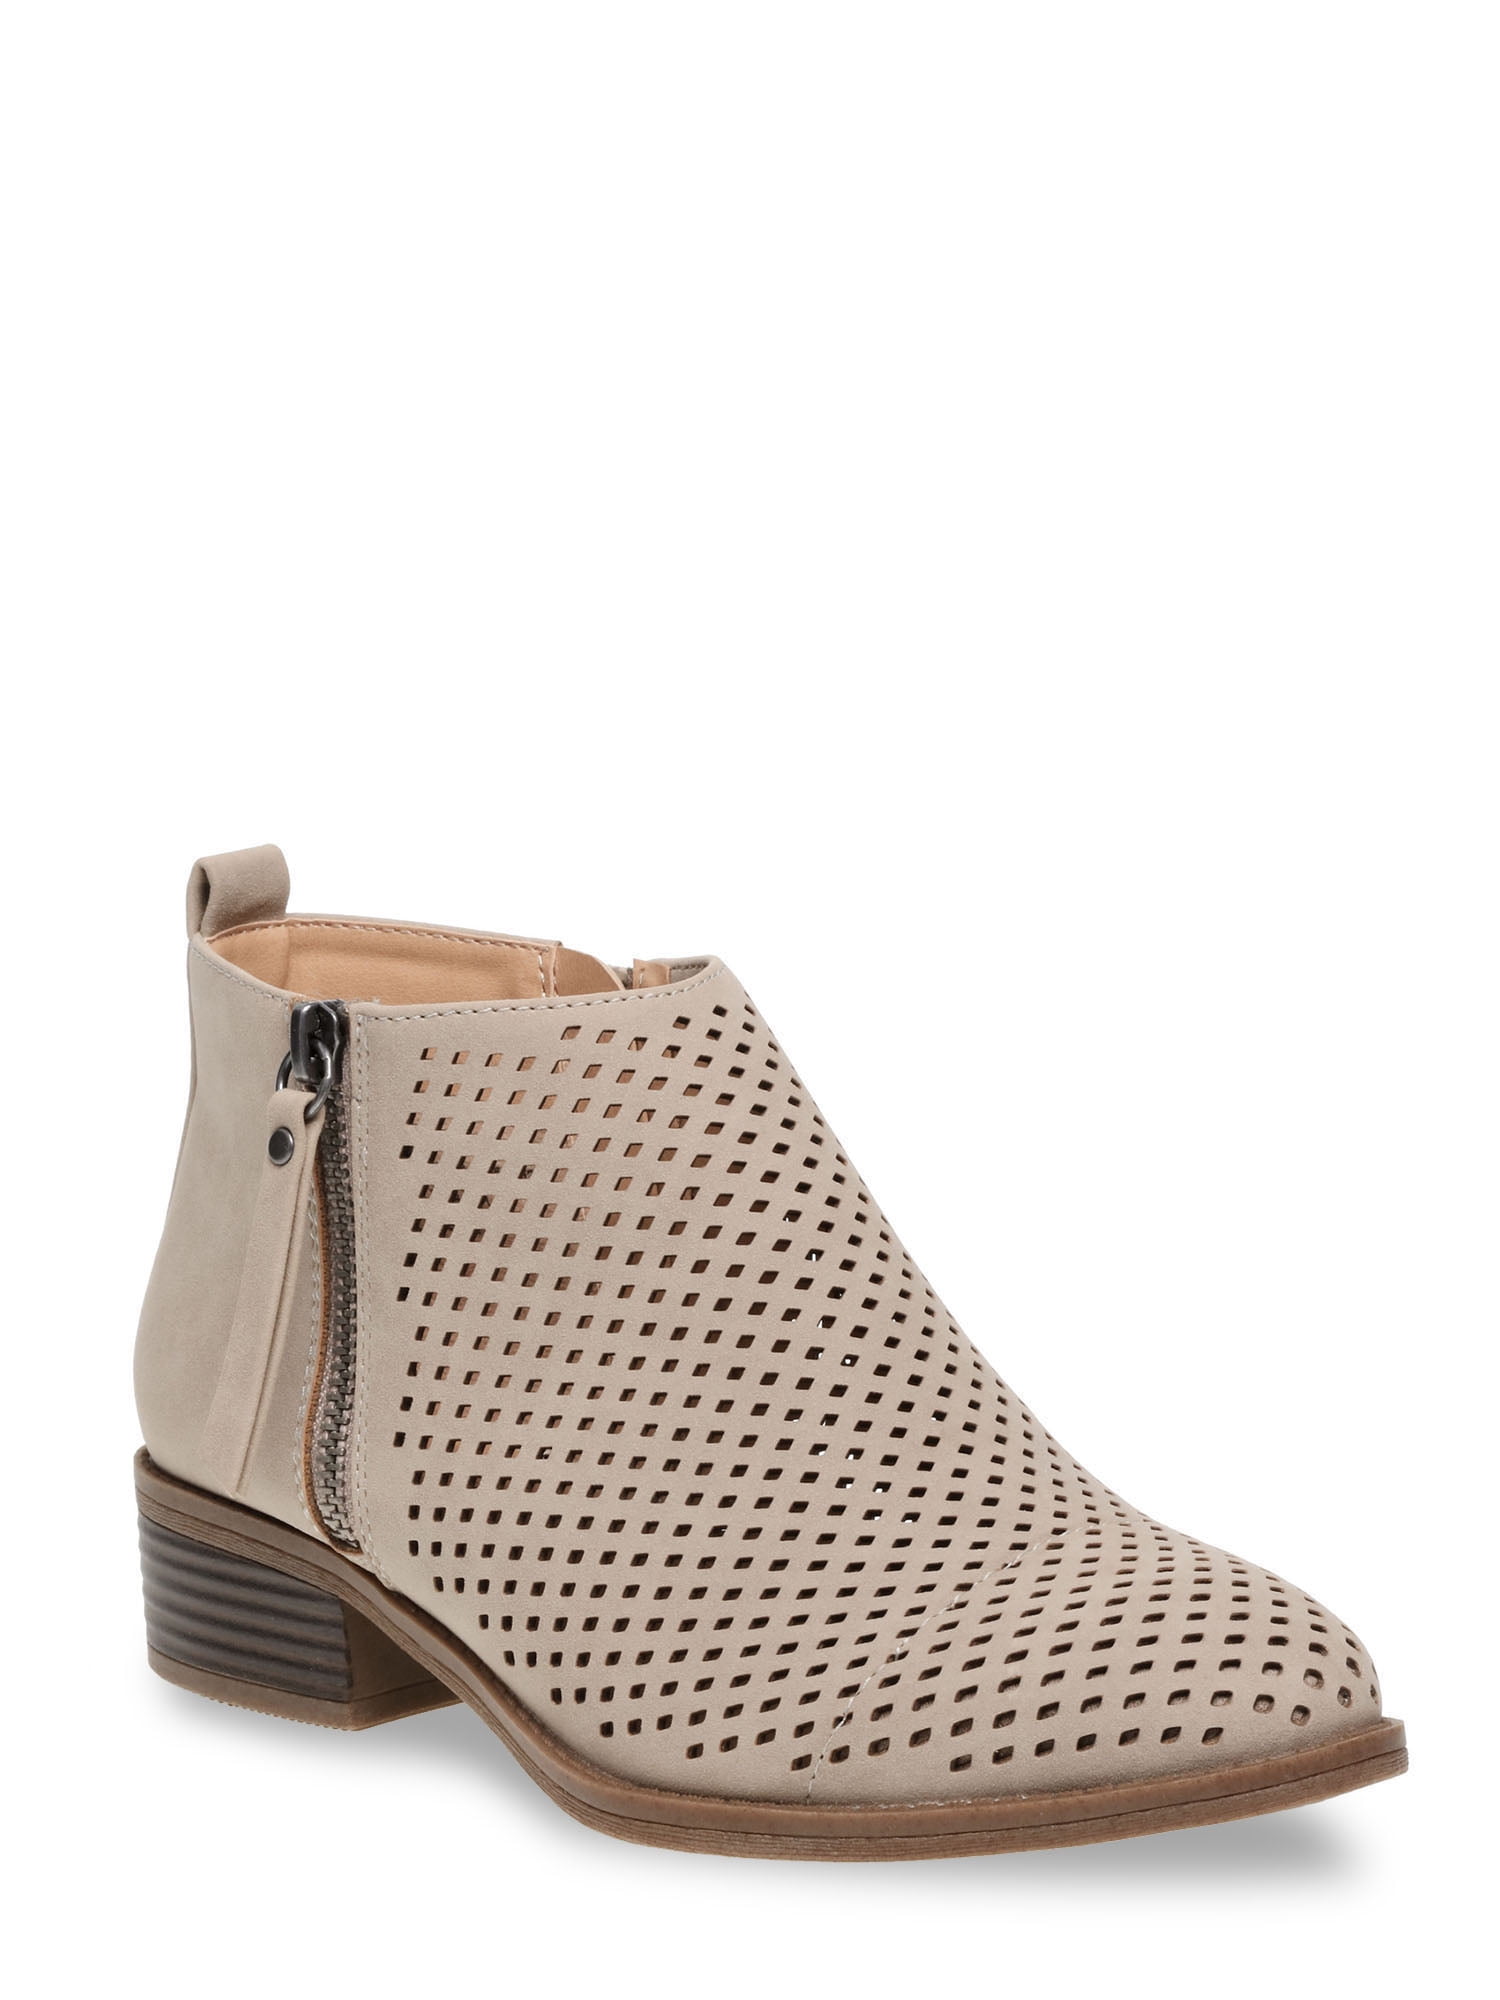 Time and Tru Women's Perforated Booties, Wide Width Available - Walmart.com